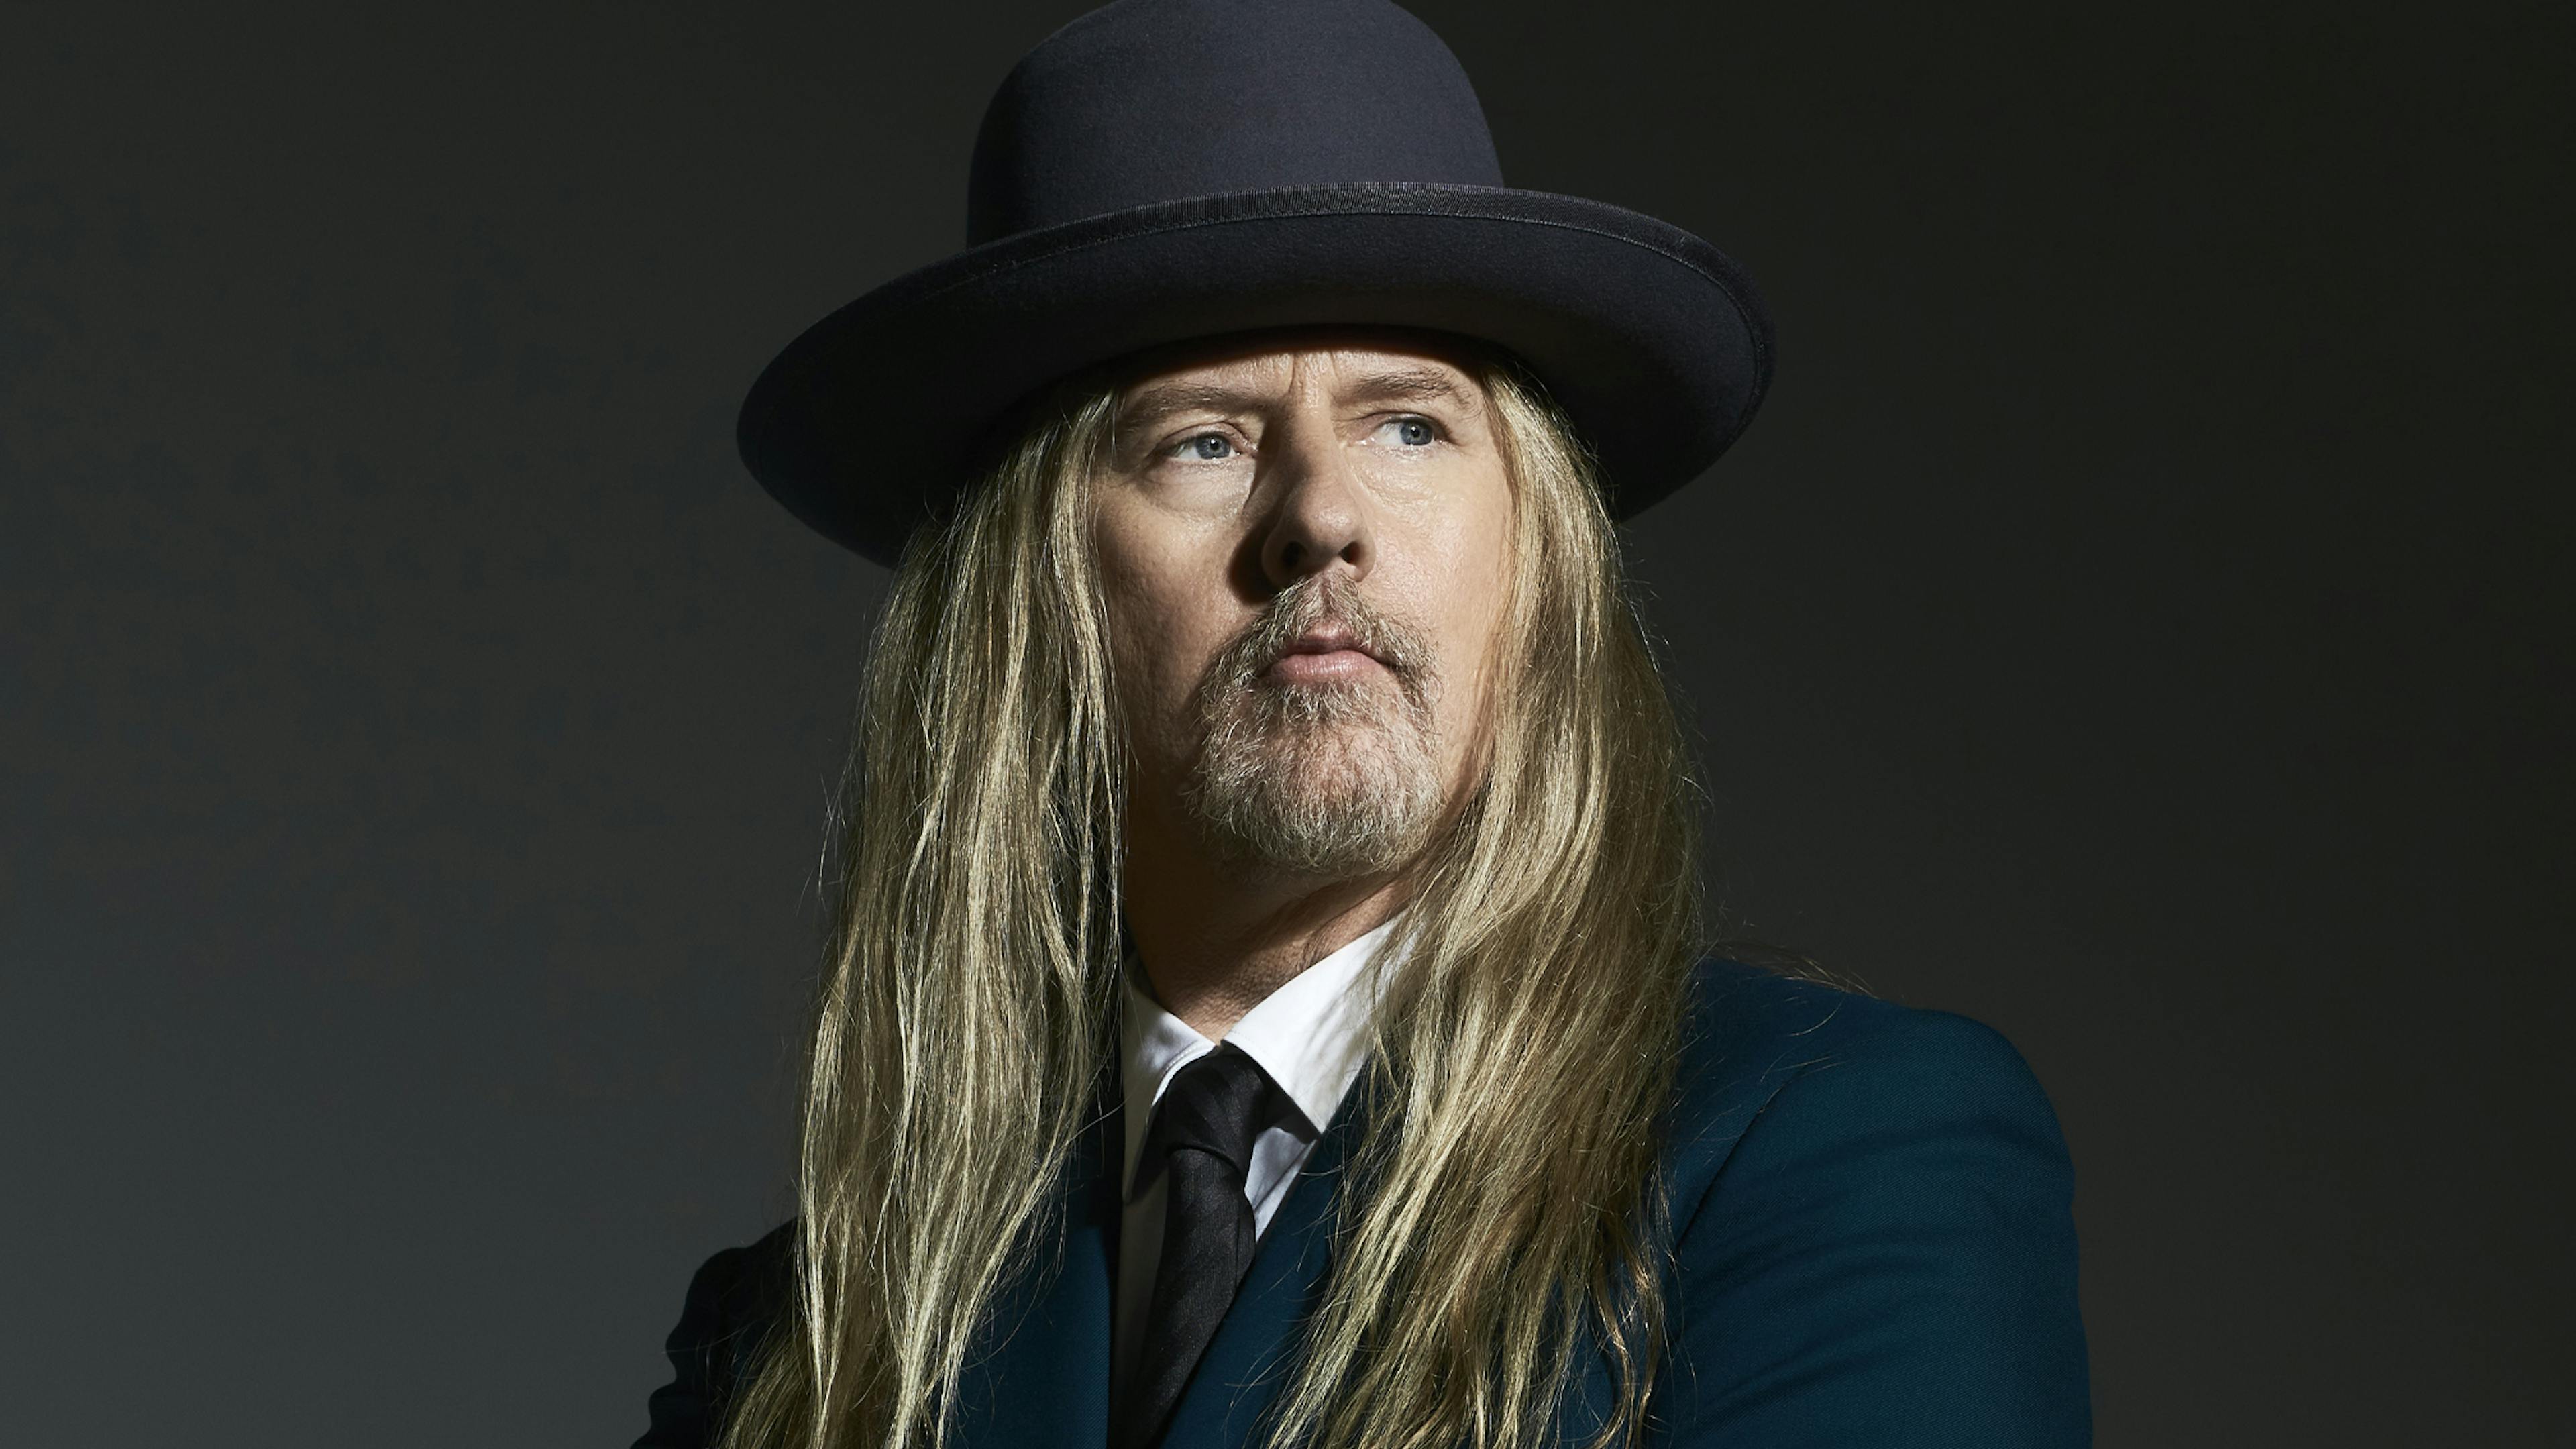 Collaborations, classic rock and Clint Eastwood: Inside Jerry Cantrell’s first solo album in 19 years